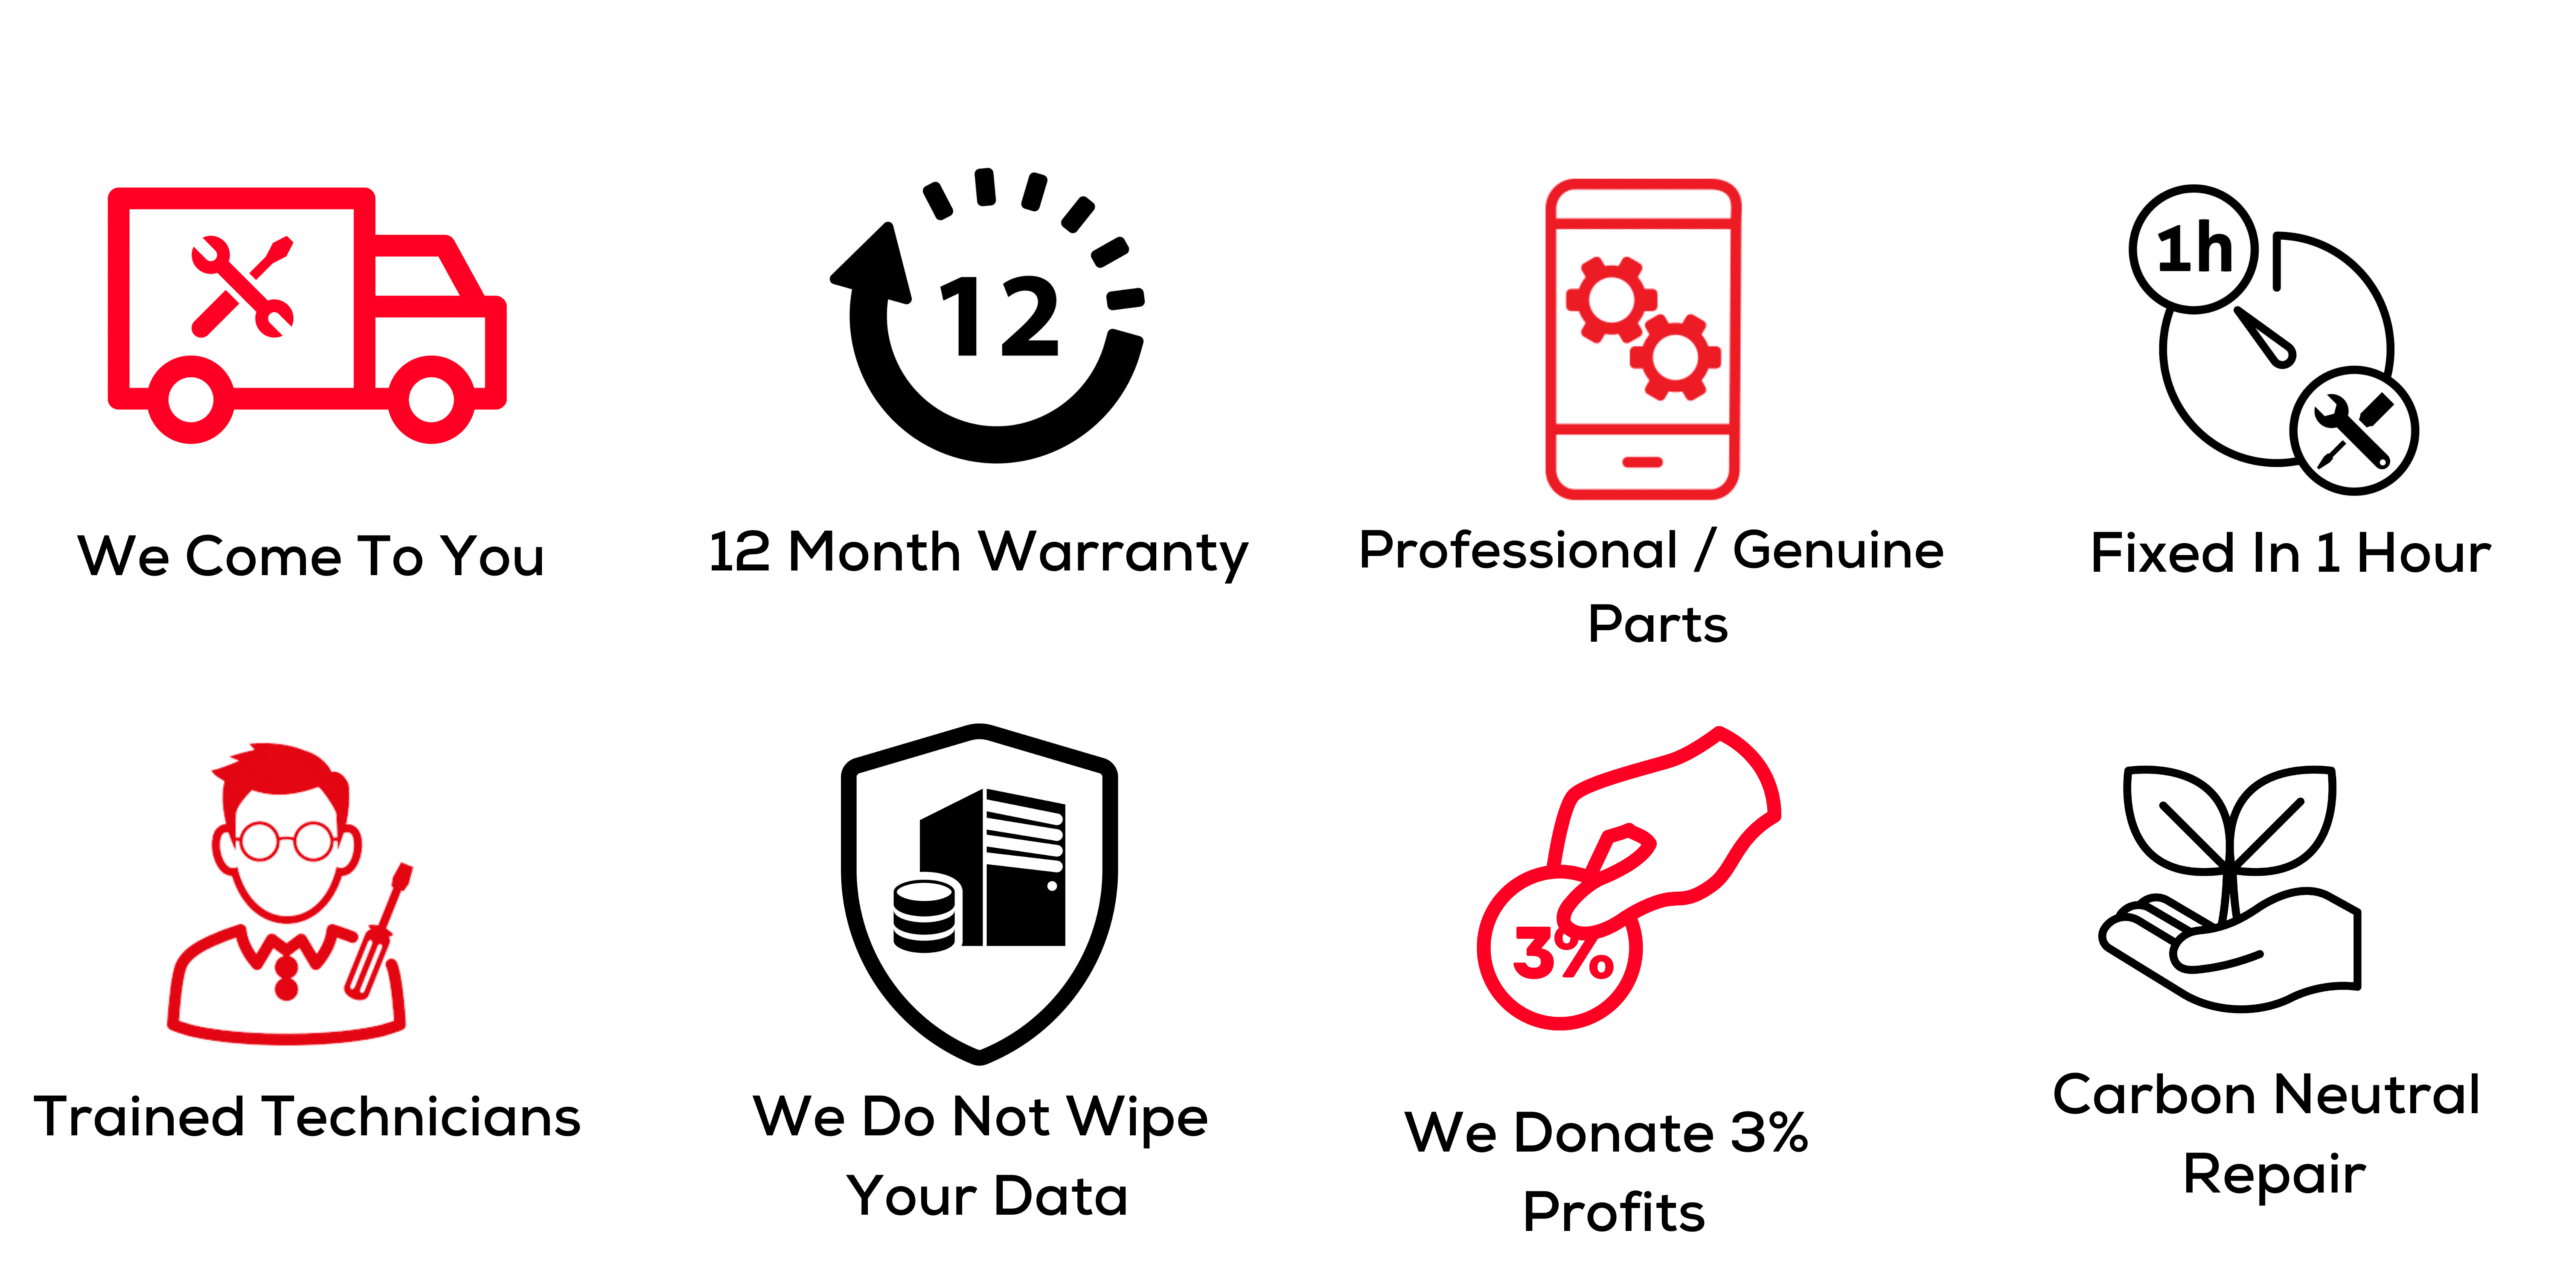 we come to you, 12 month warranty, professional parts, fixed in 1 hour, trained technicians, we do not wipe your data, we donate 3% profits, carbon neutral repairs